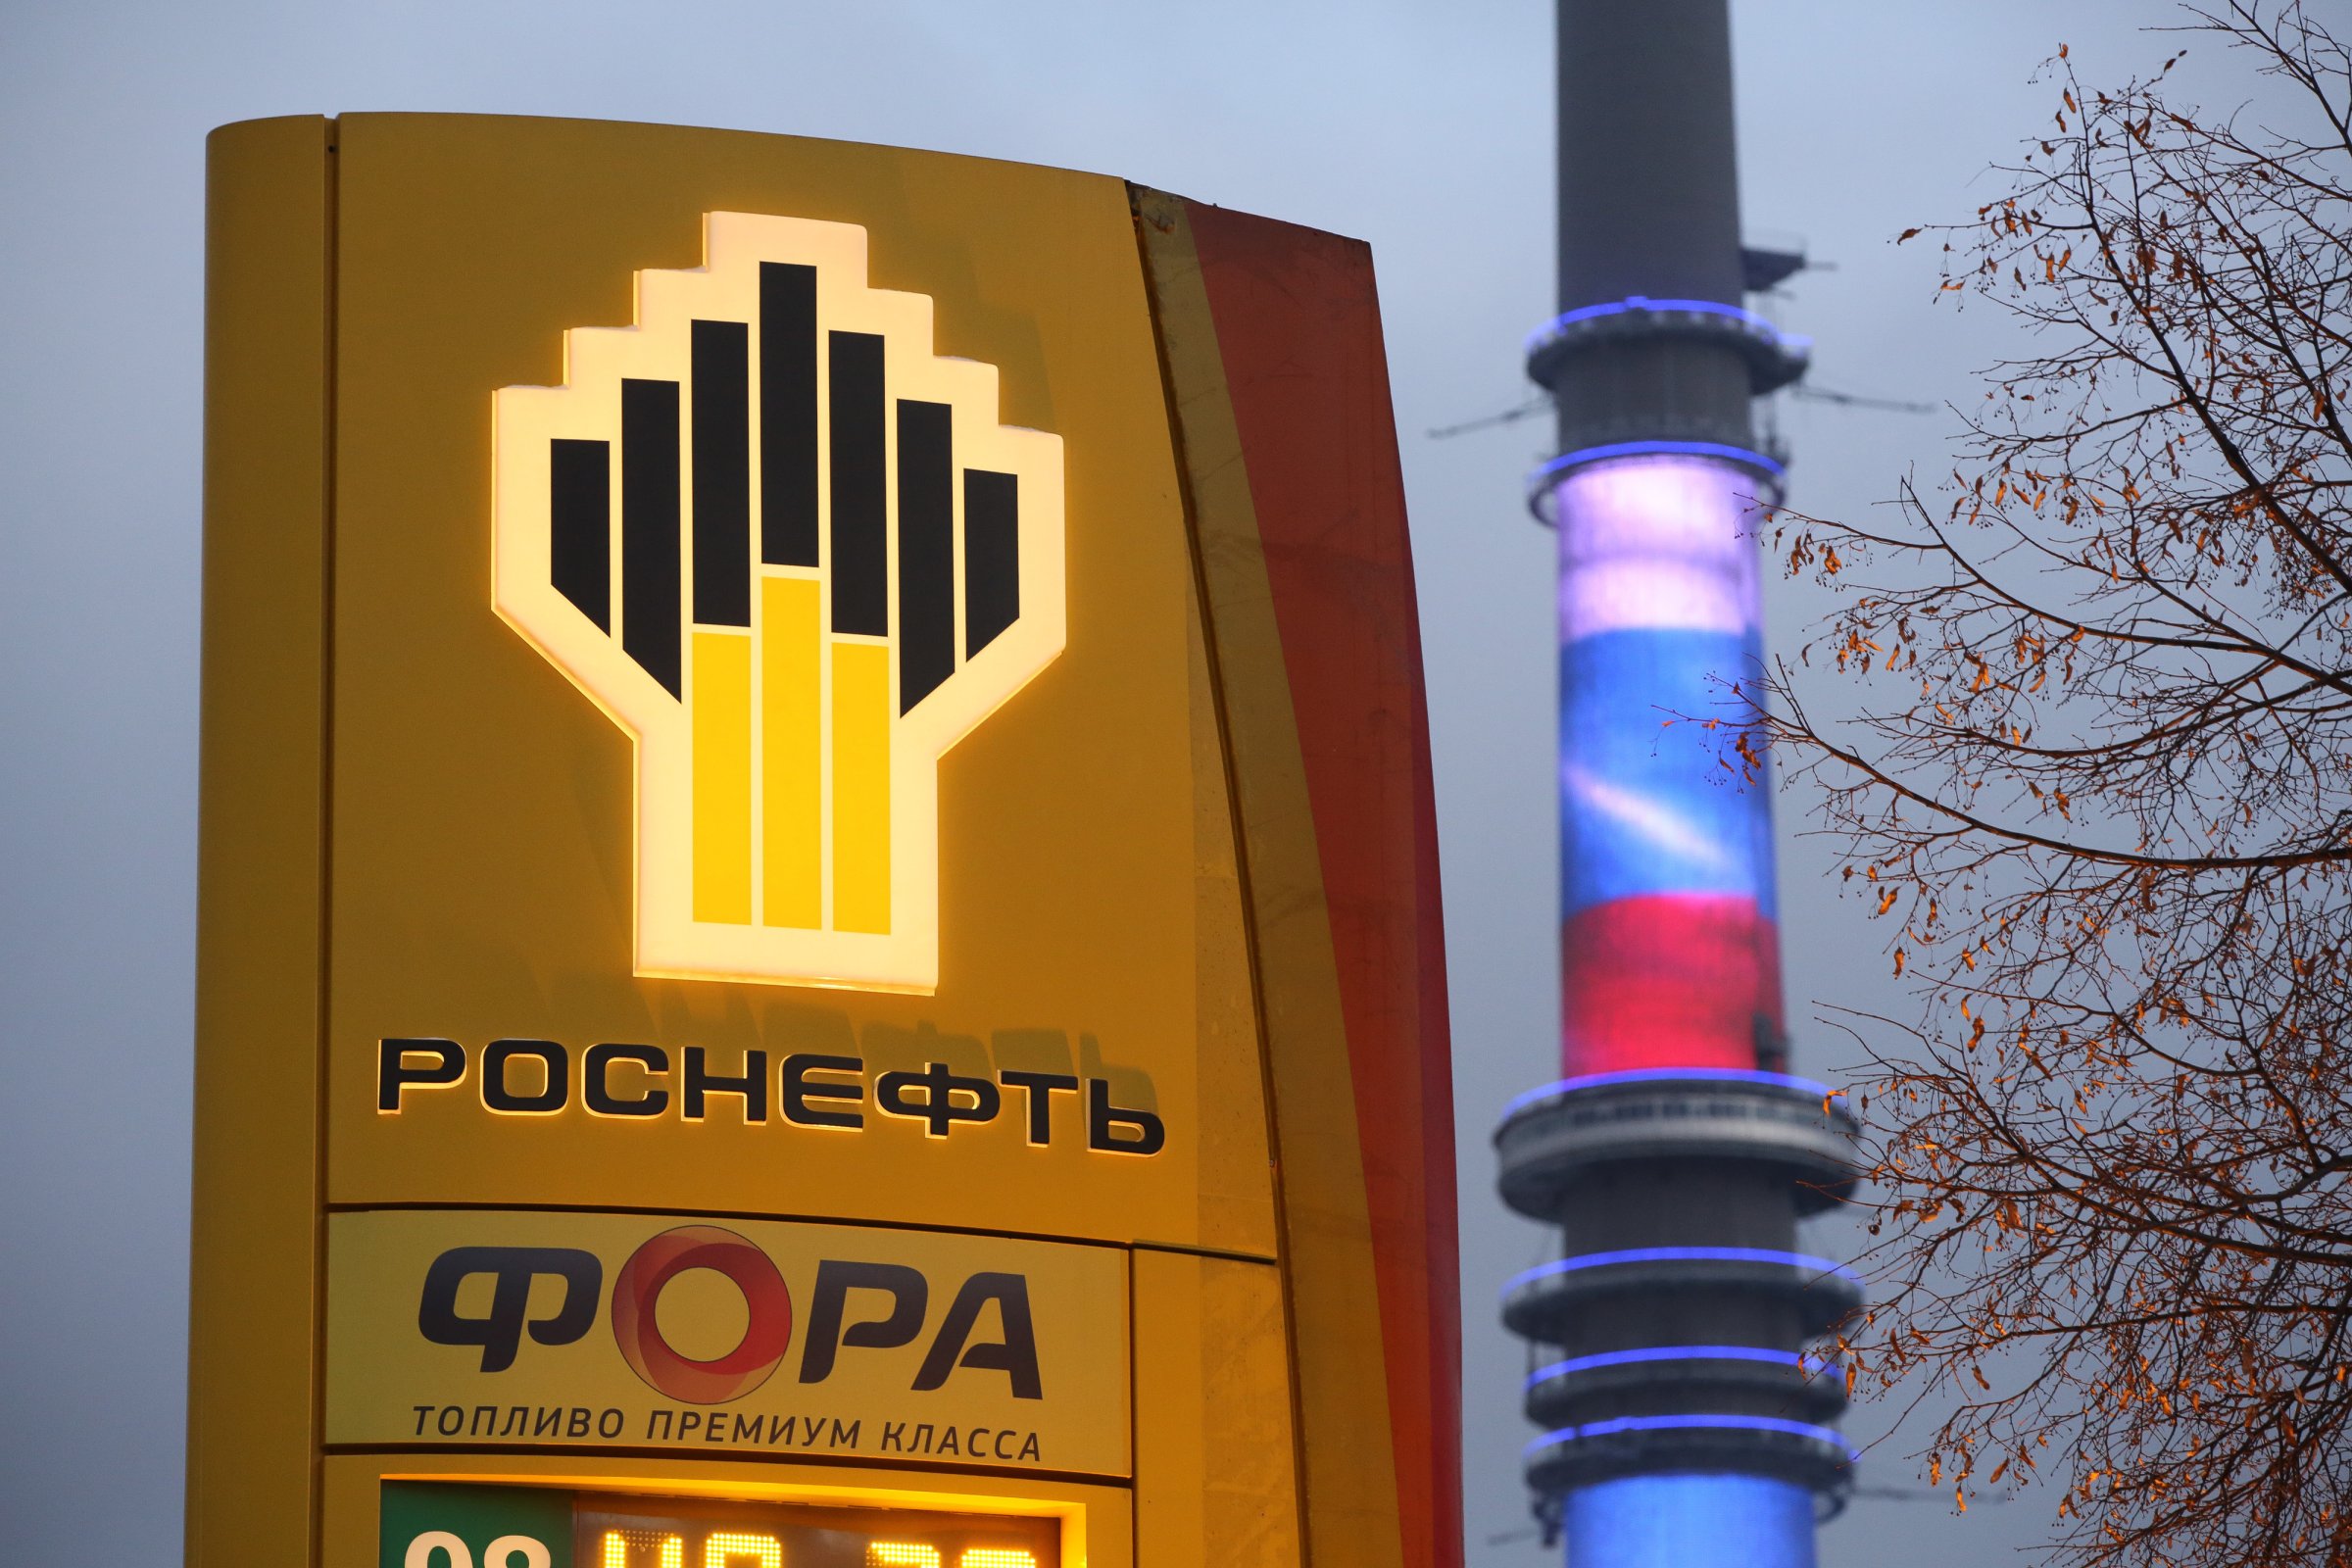 Fuel Prices At Russian Gas Stations As Oil Price Drops